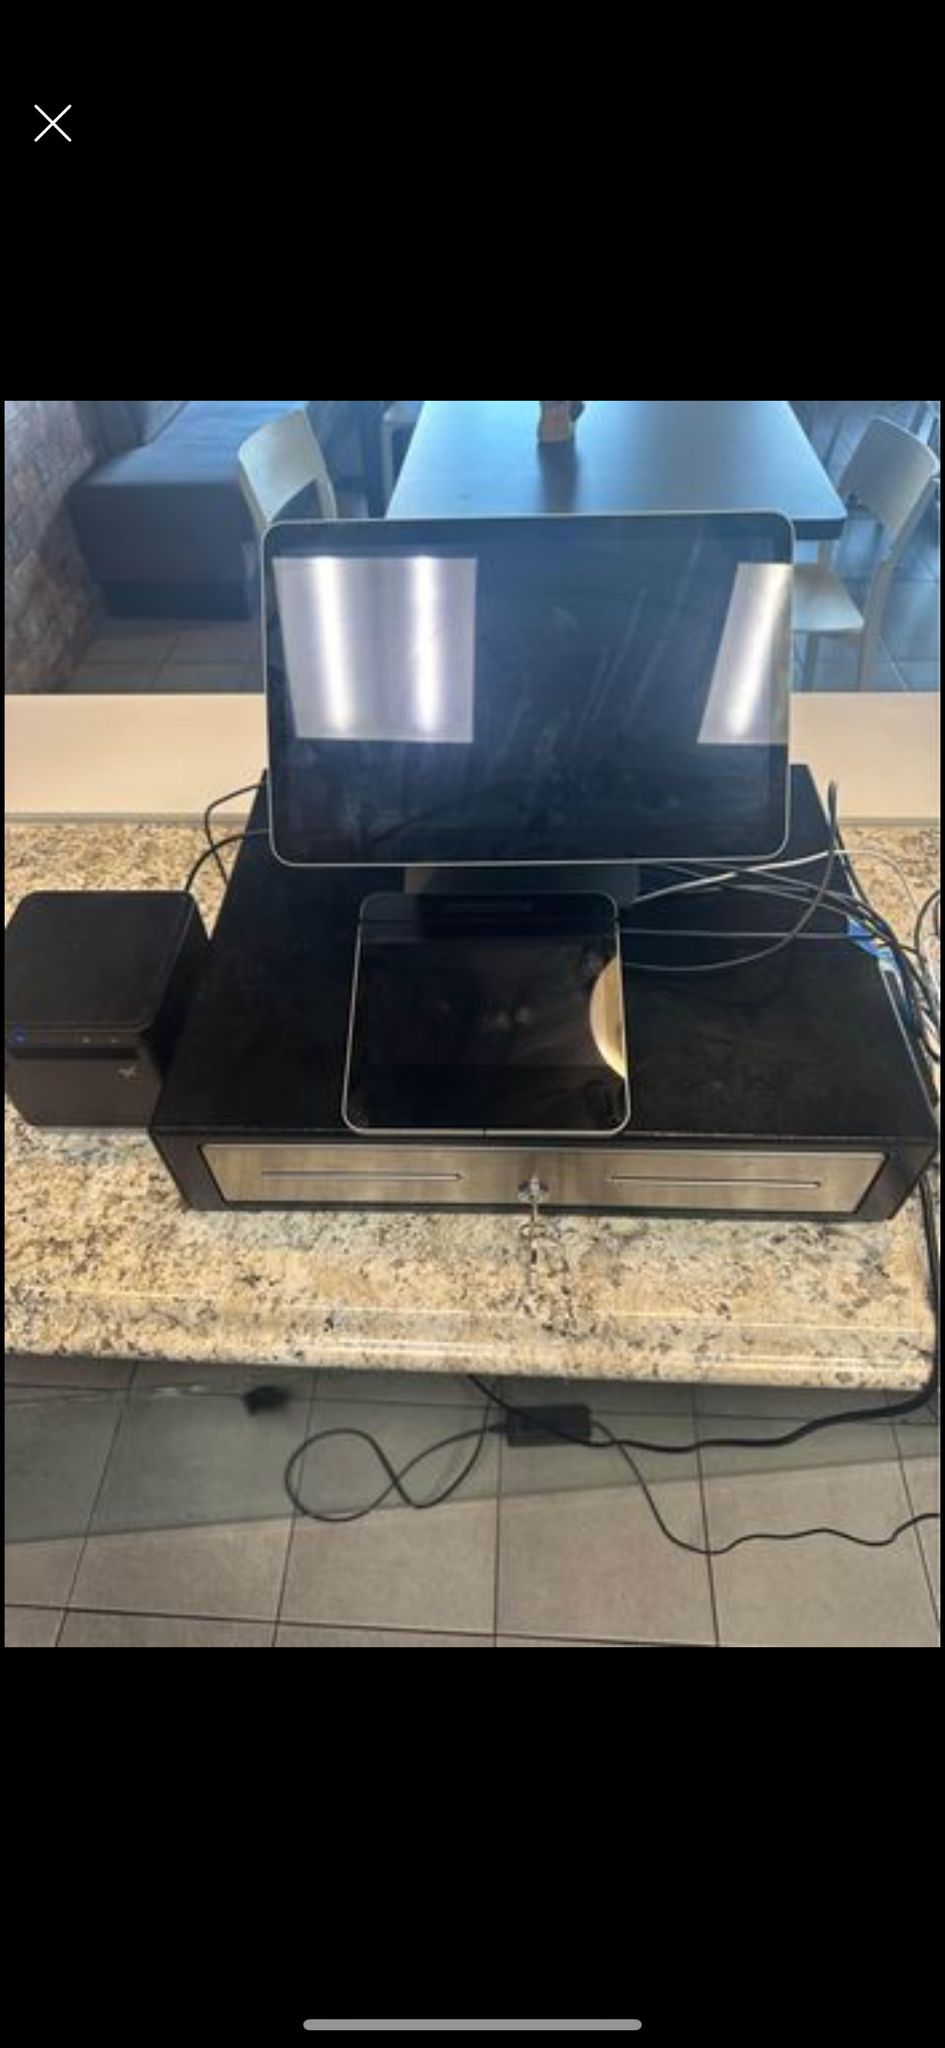 Square POS System with printer and cash drawer